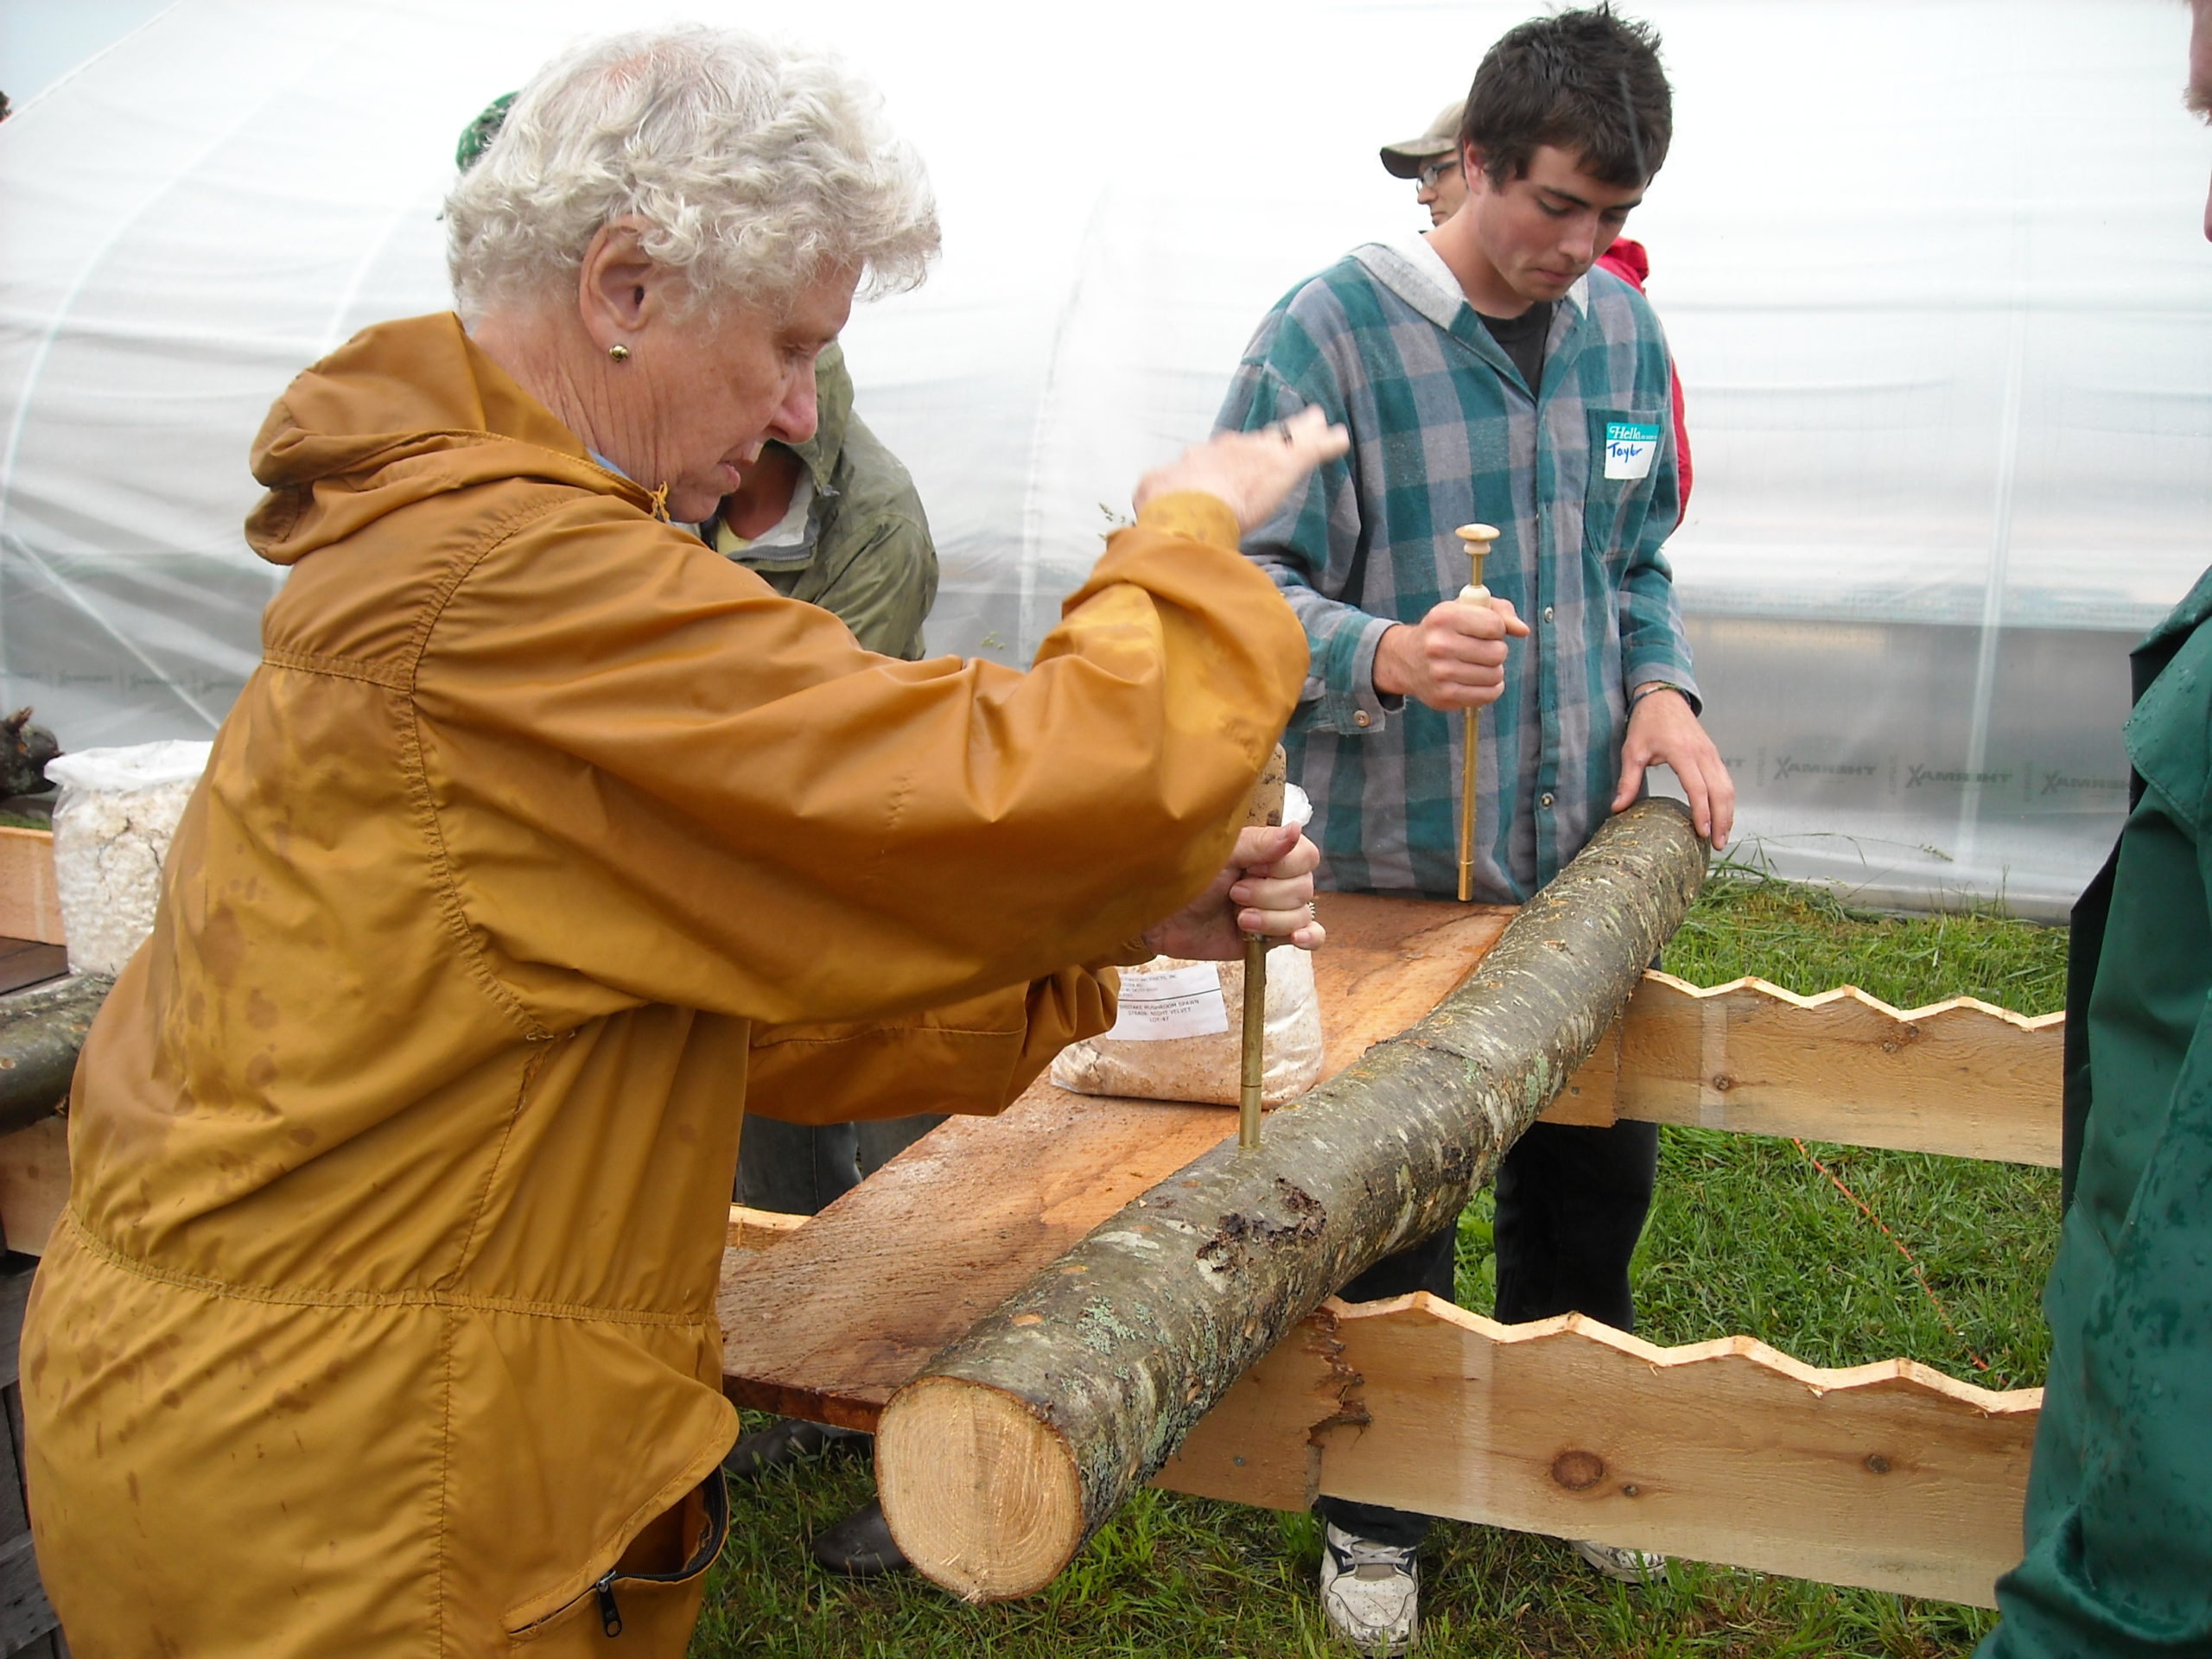 A man uses an inoculator to inoculate a log with spawn.